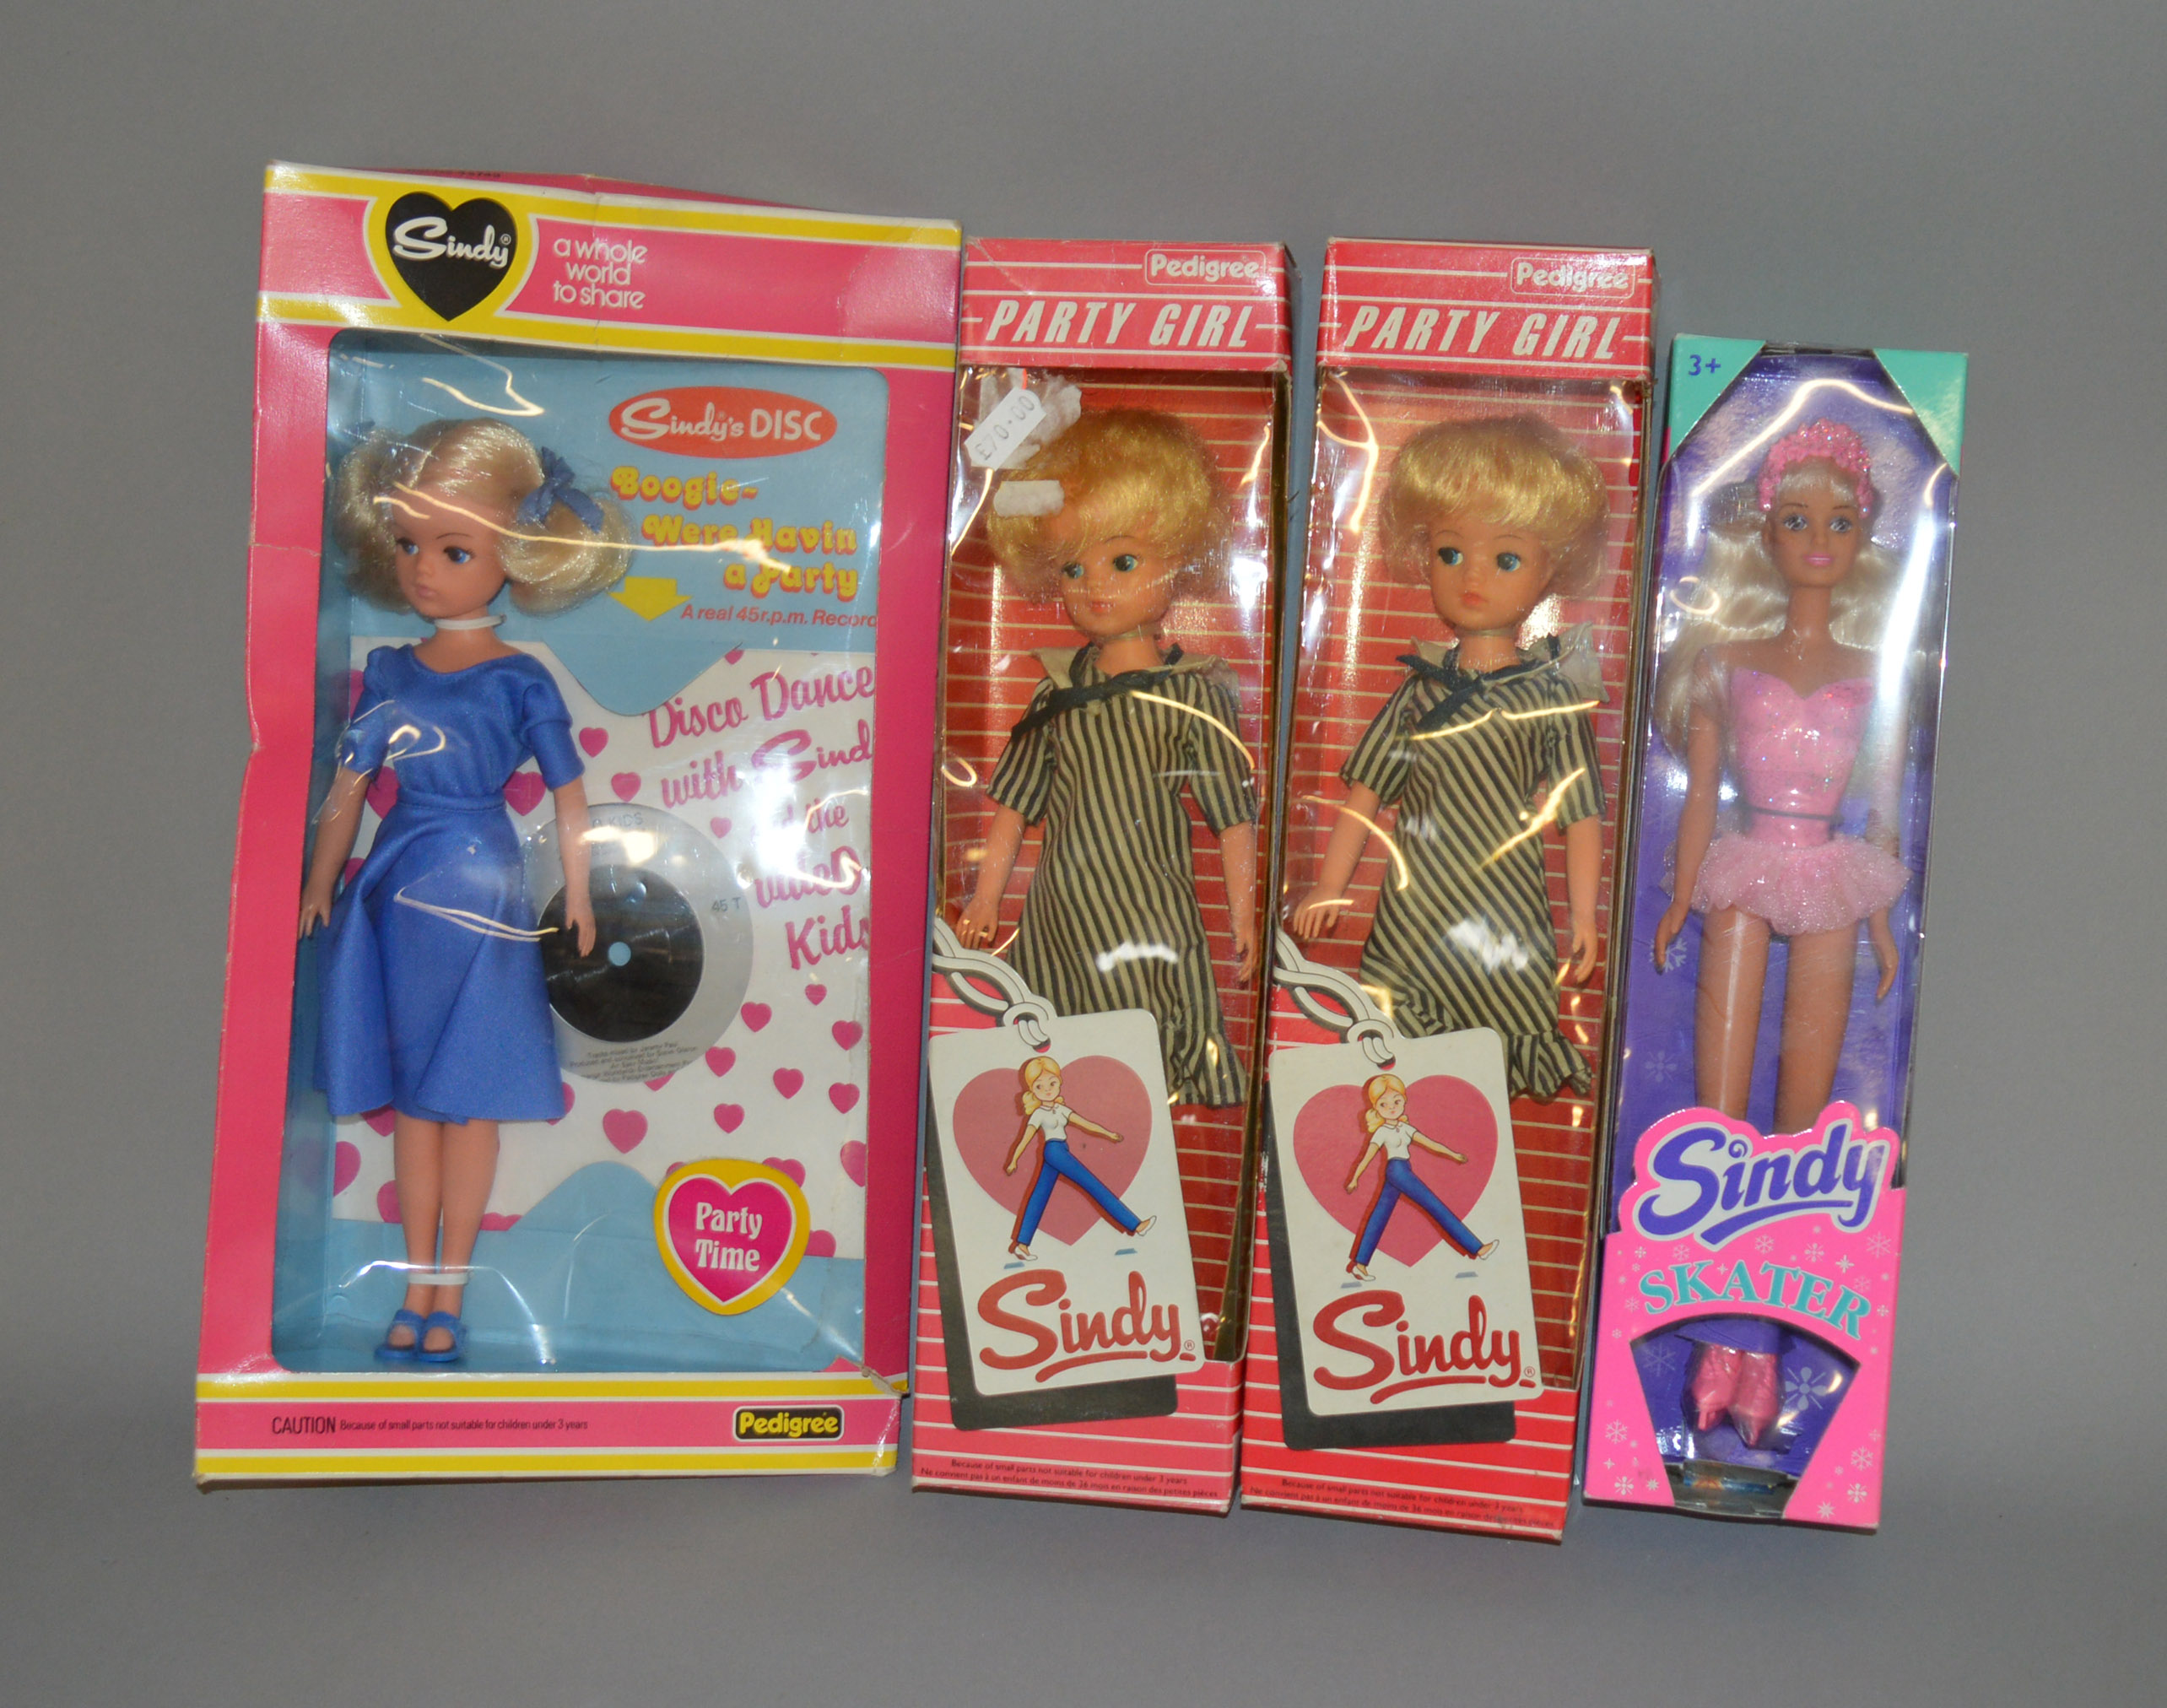 EX-SHOP STOCK: Three Pedigree Sindy Fashion Dolls together with a Hasbro example,